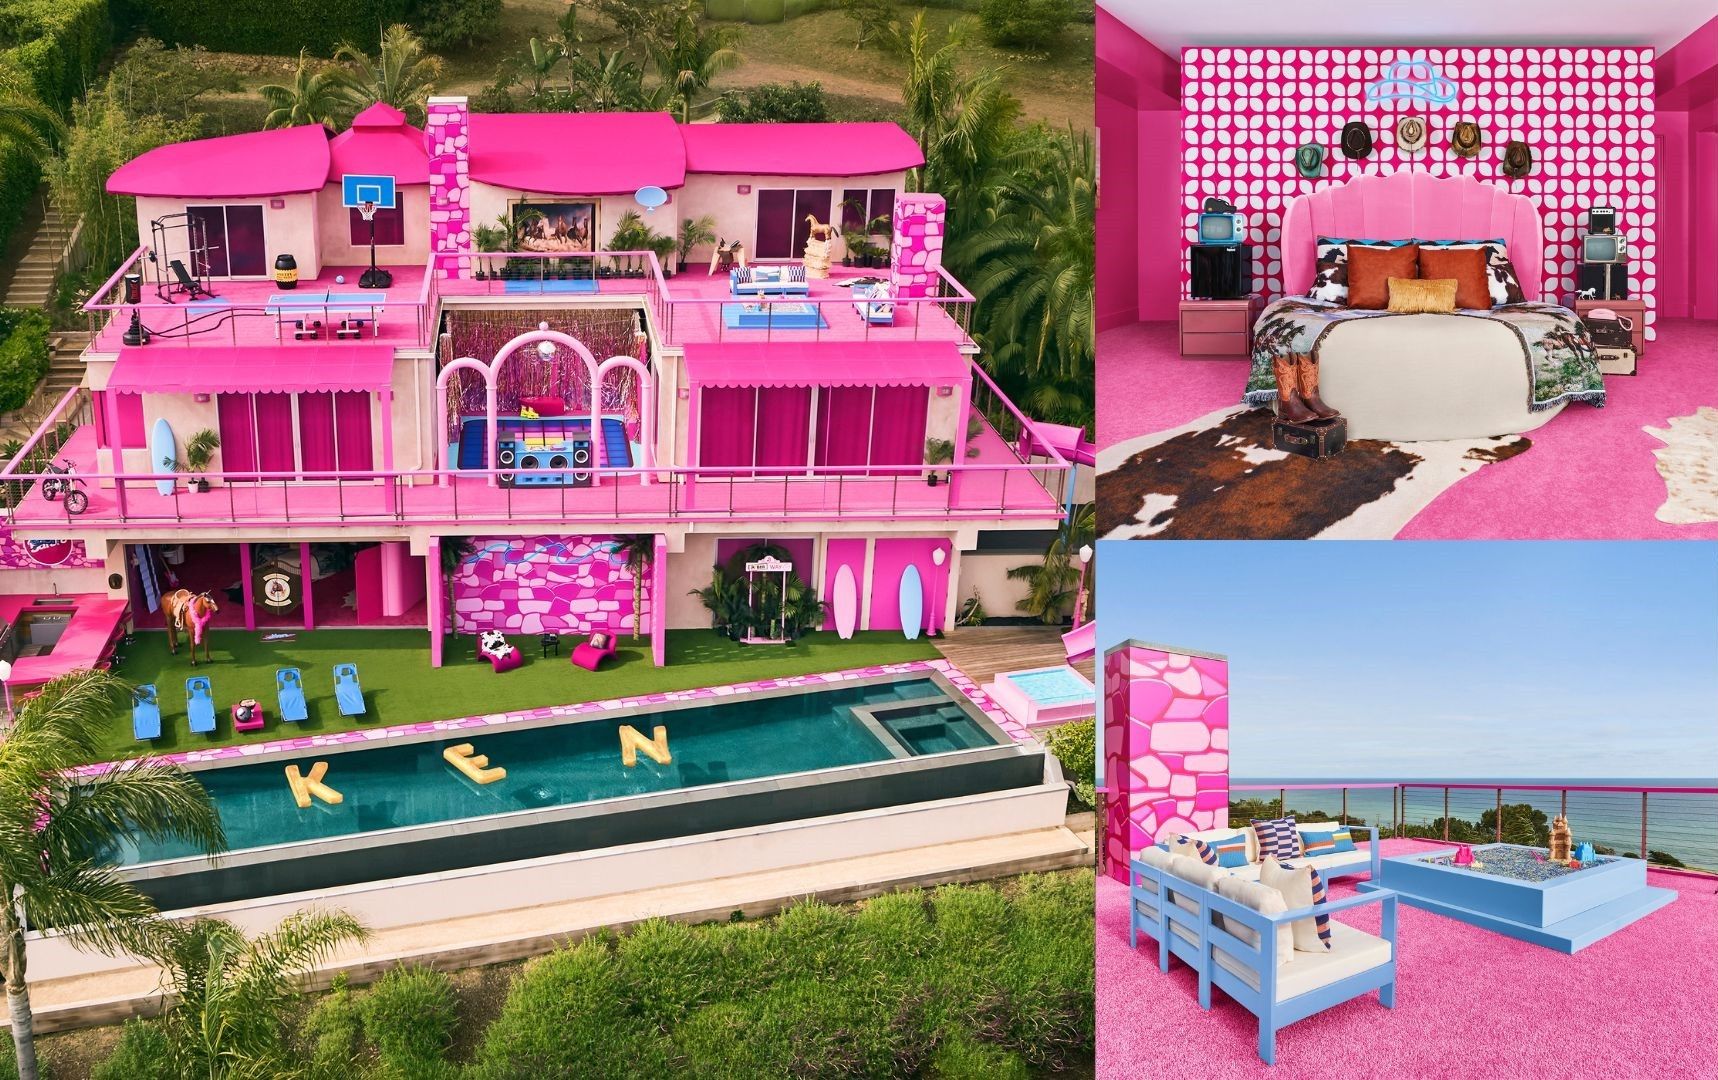 Barbie and Ken unveil bright-pink lifesize dollhouse in Malibu